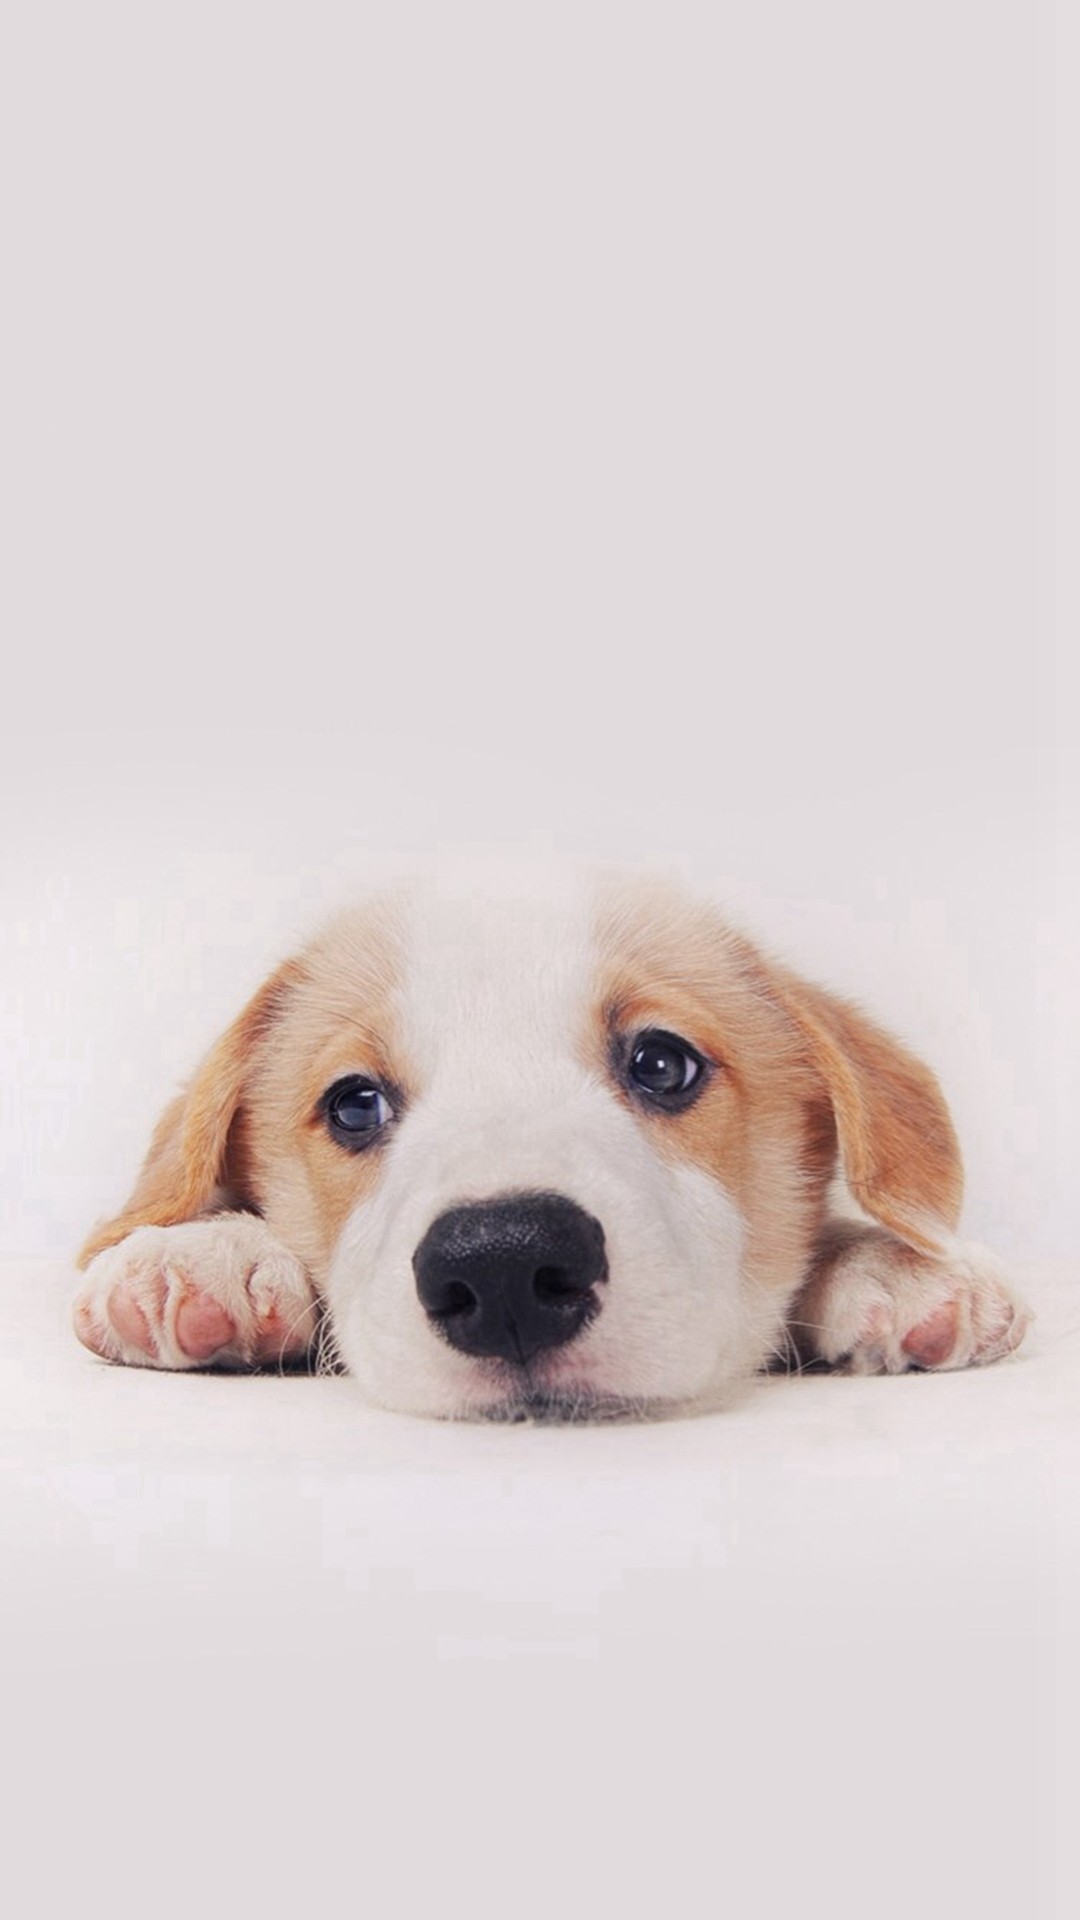 Puppy Wallpaper and Screensavers (53+ images)